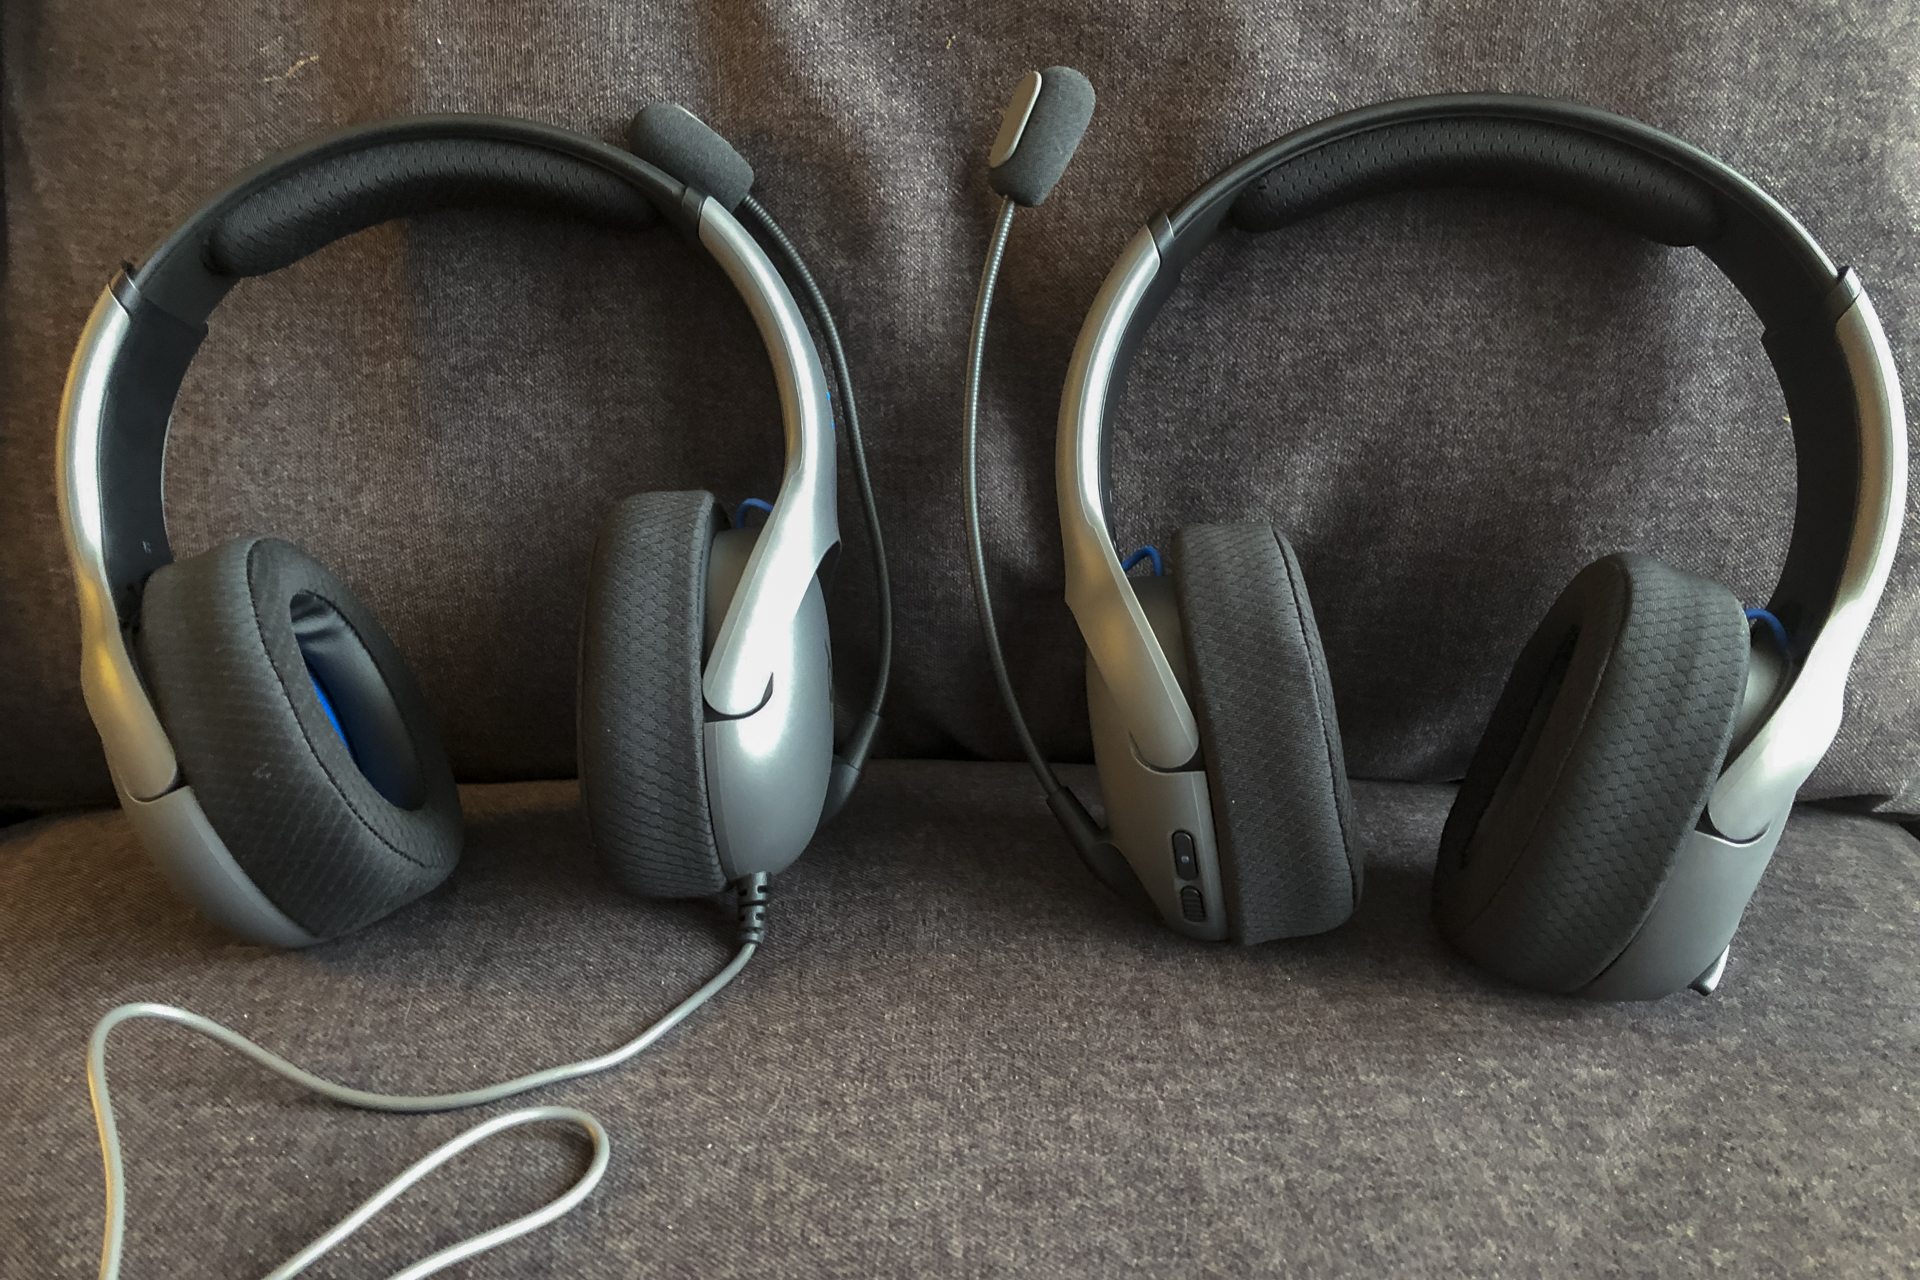 PDP LVL50 Wired Gaming Headset Review